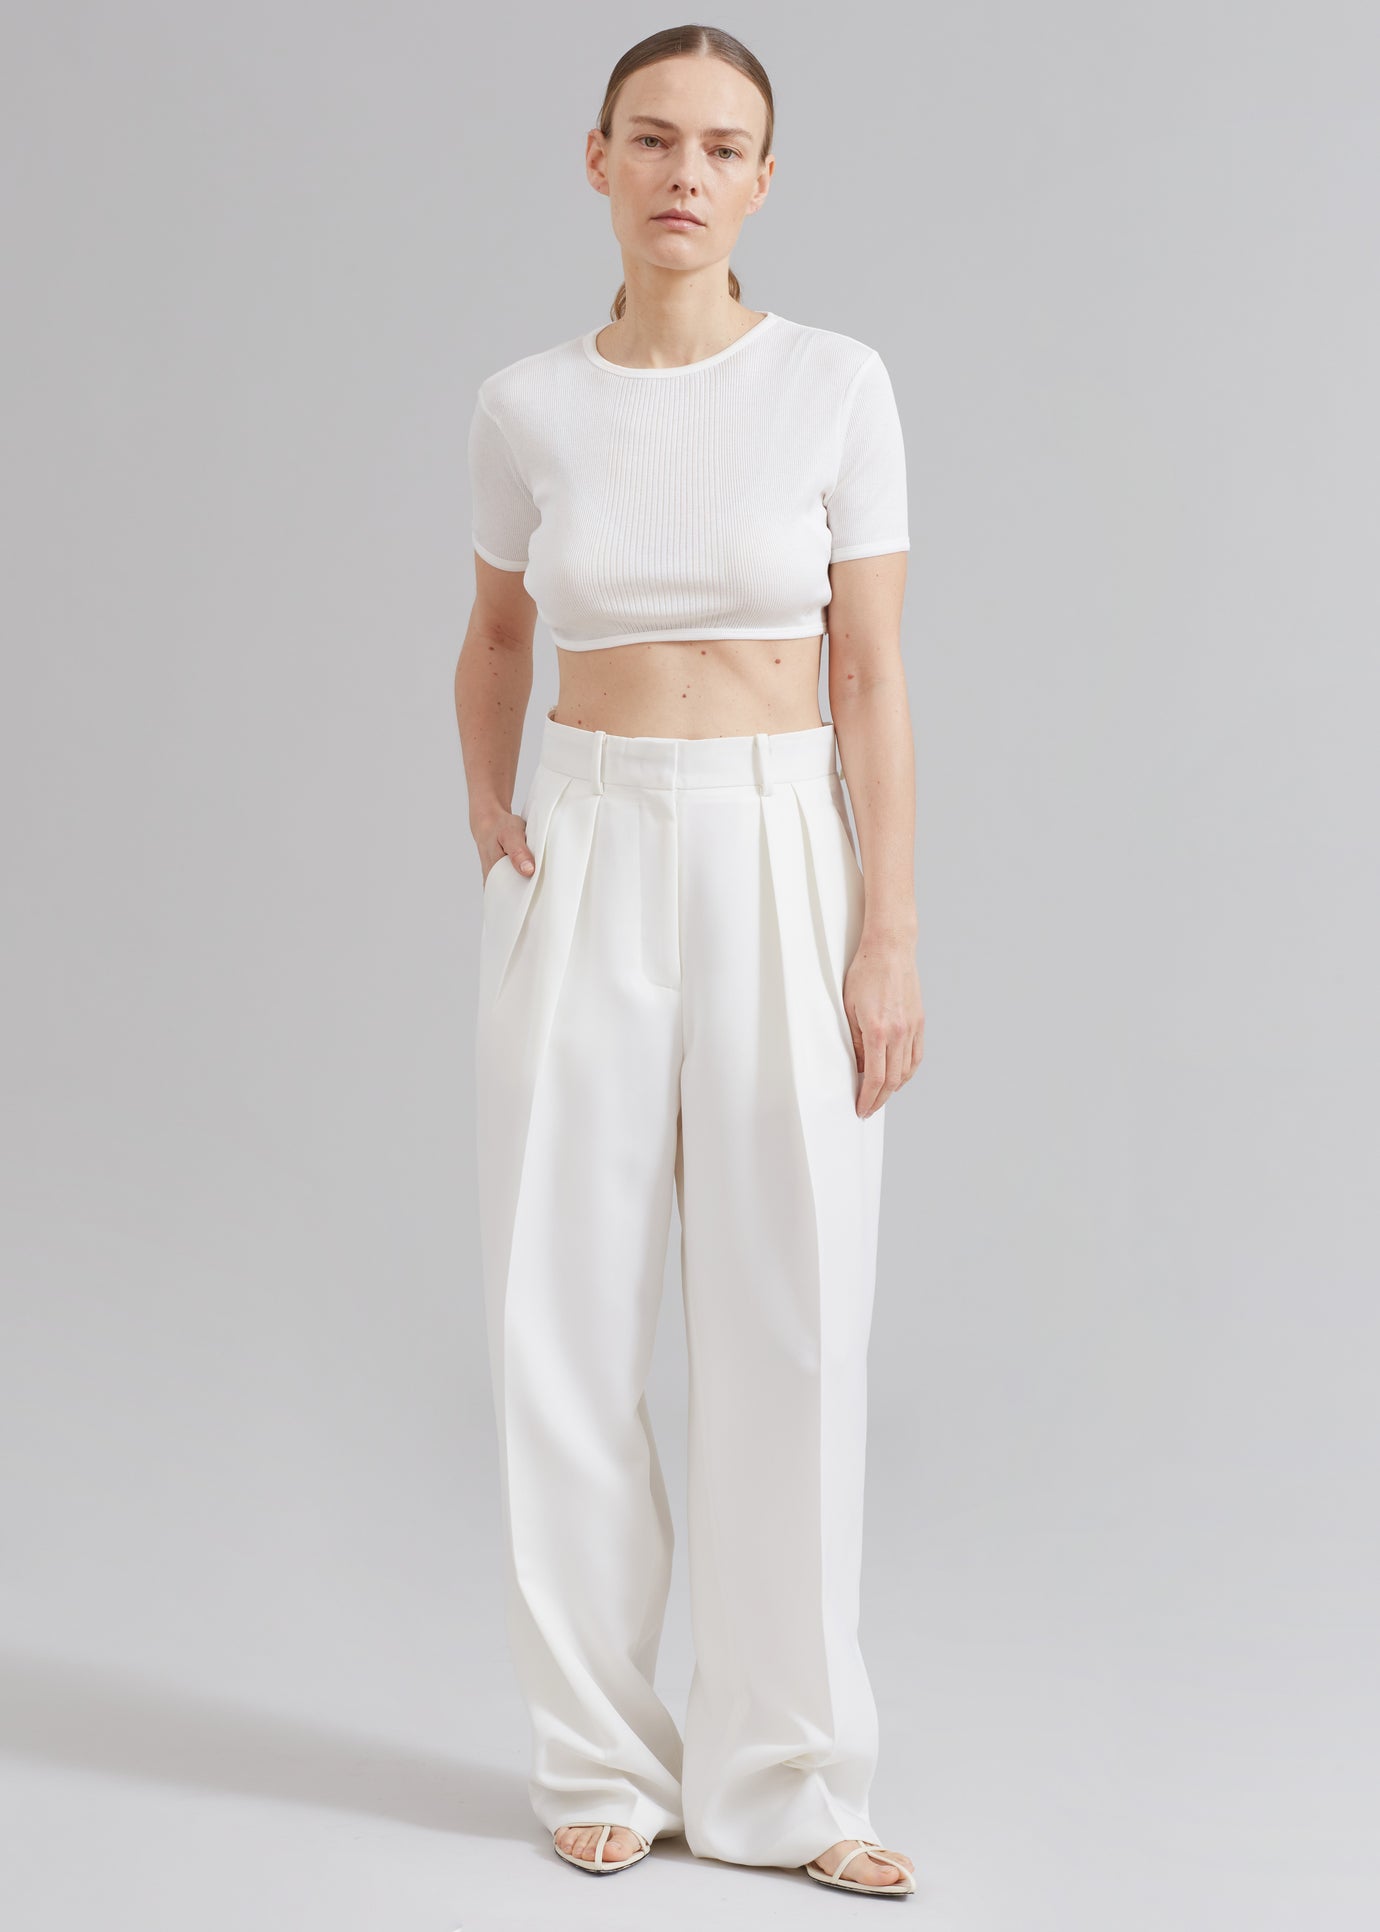 Loulou Studio Adas Cropped Top - Ivory - 1